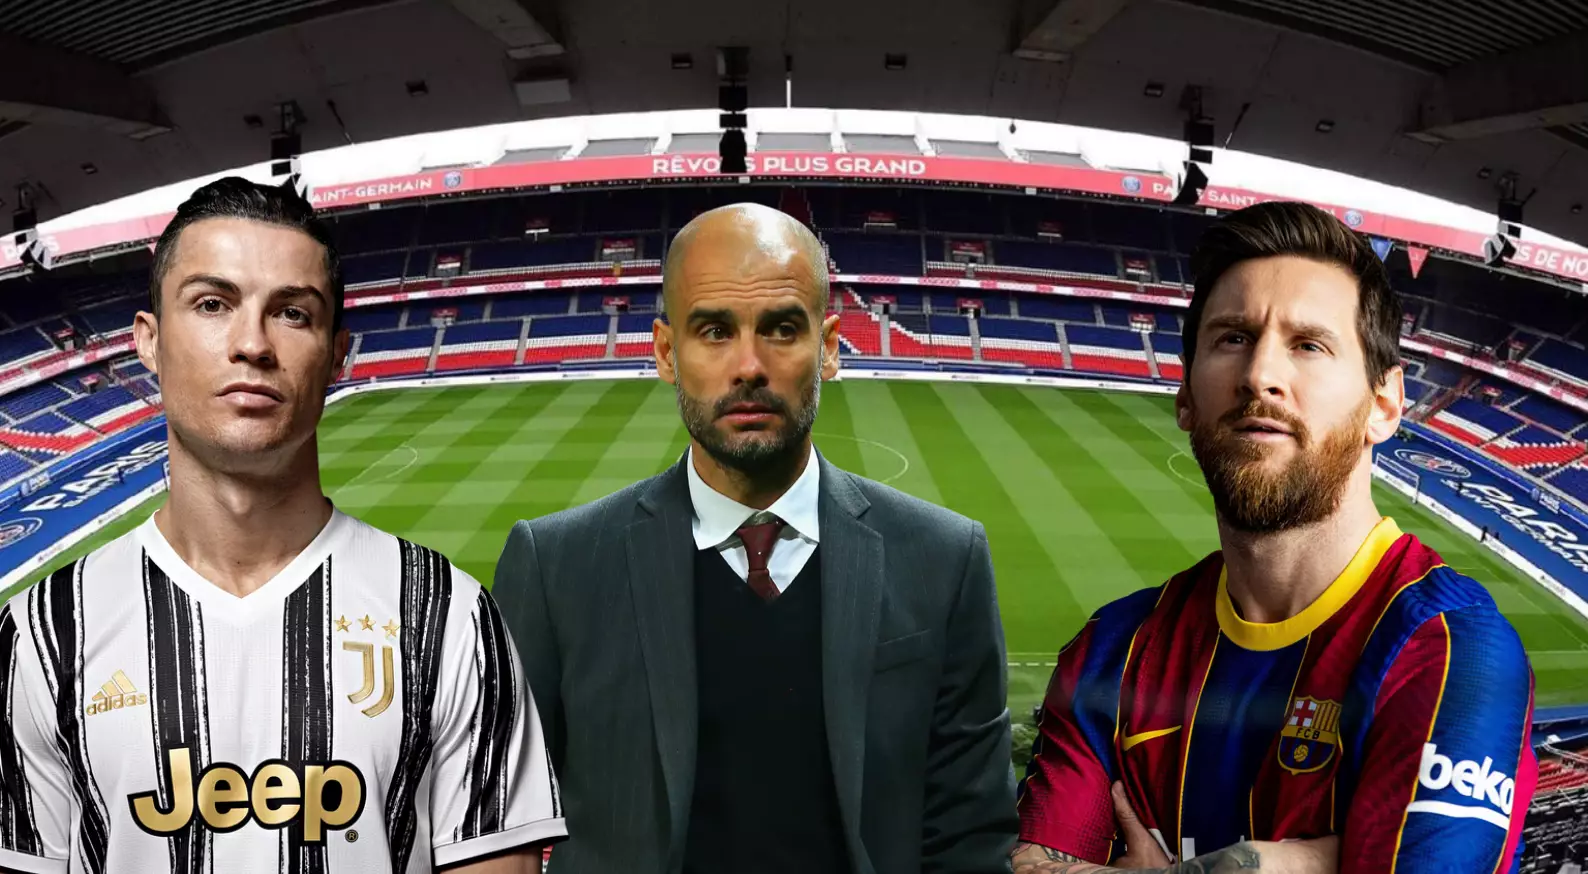 Lionel Messi, Cristiano Ronaldo And Pep Guardiola Will Reportedly Team Up At PSG By 2021